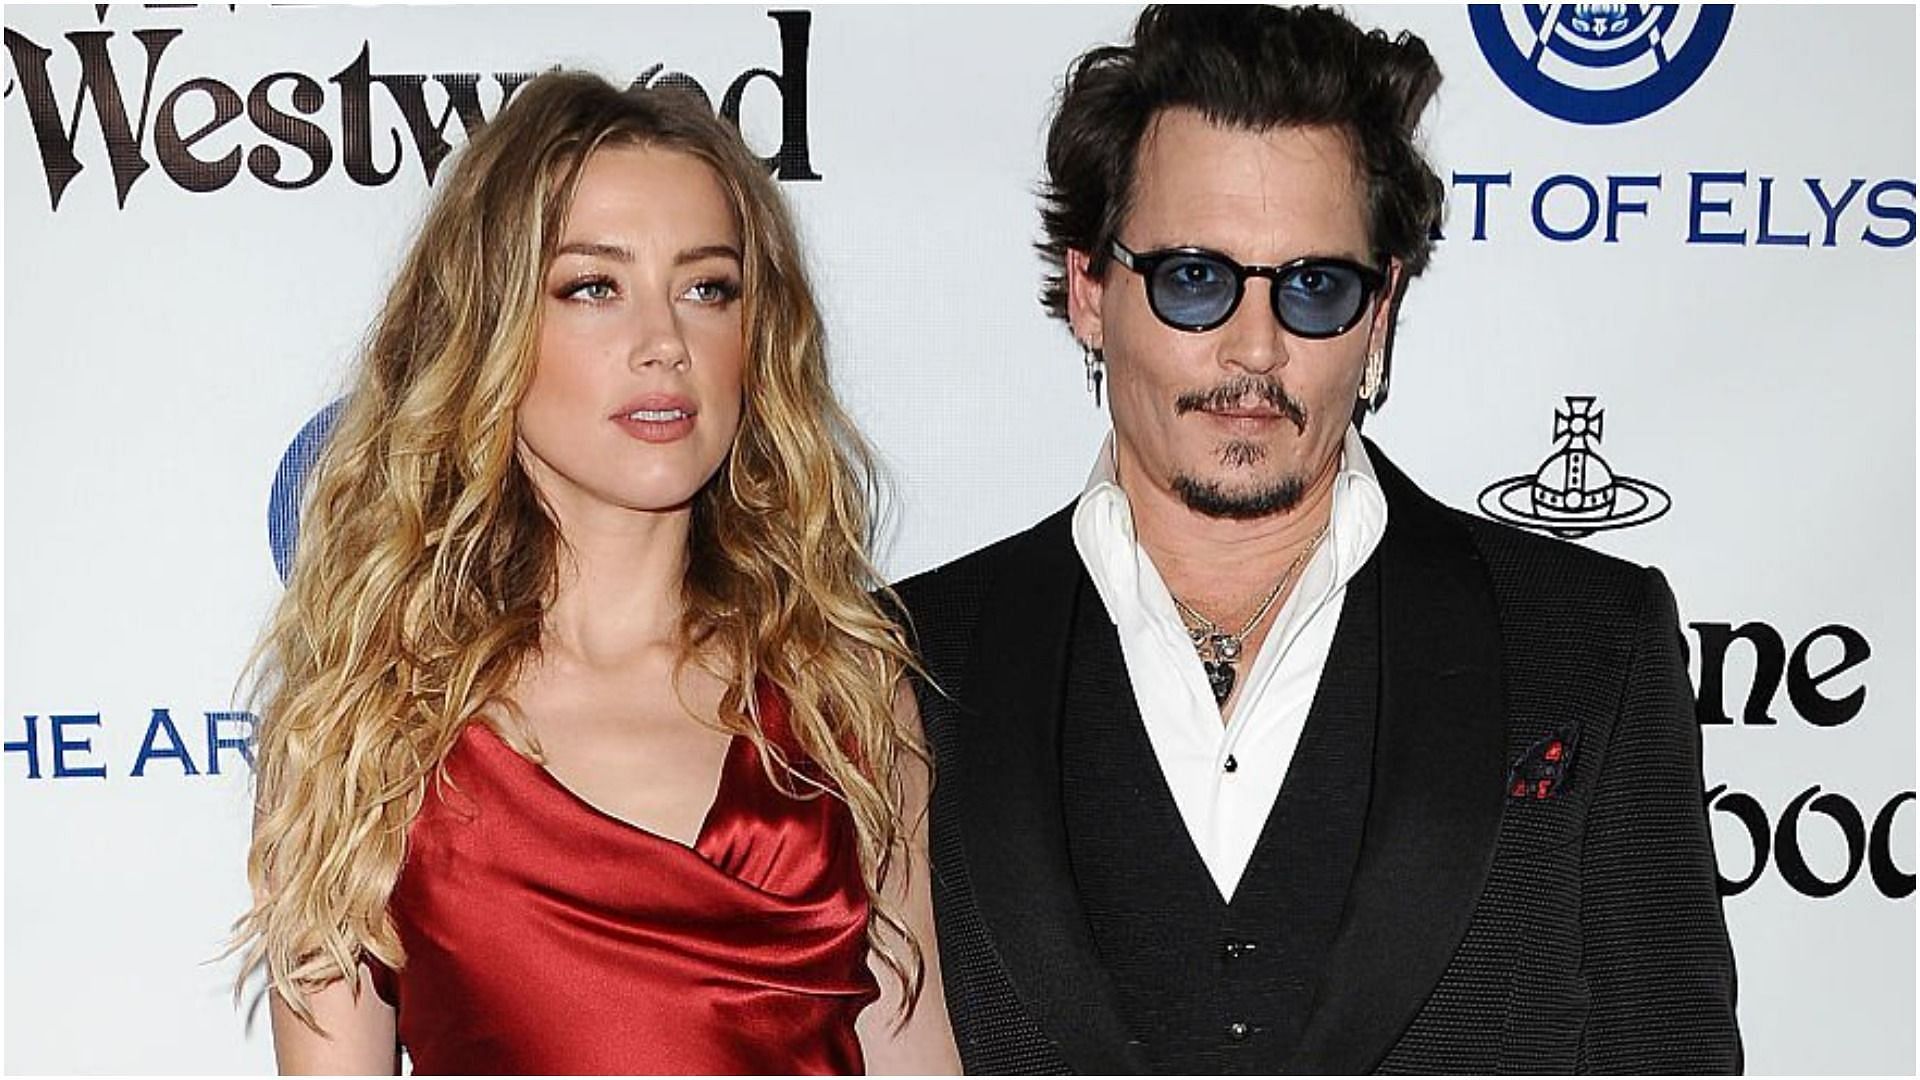 Johnny Depp has filed another defamation case against Amber Heard (Image via Jason LaVeris/Getty Images)